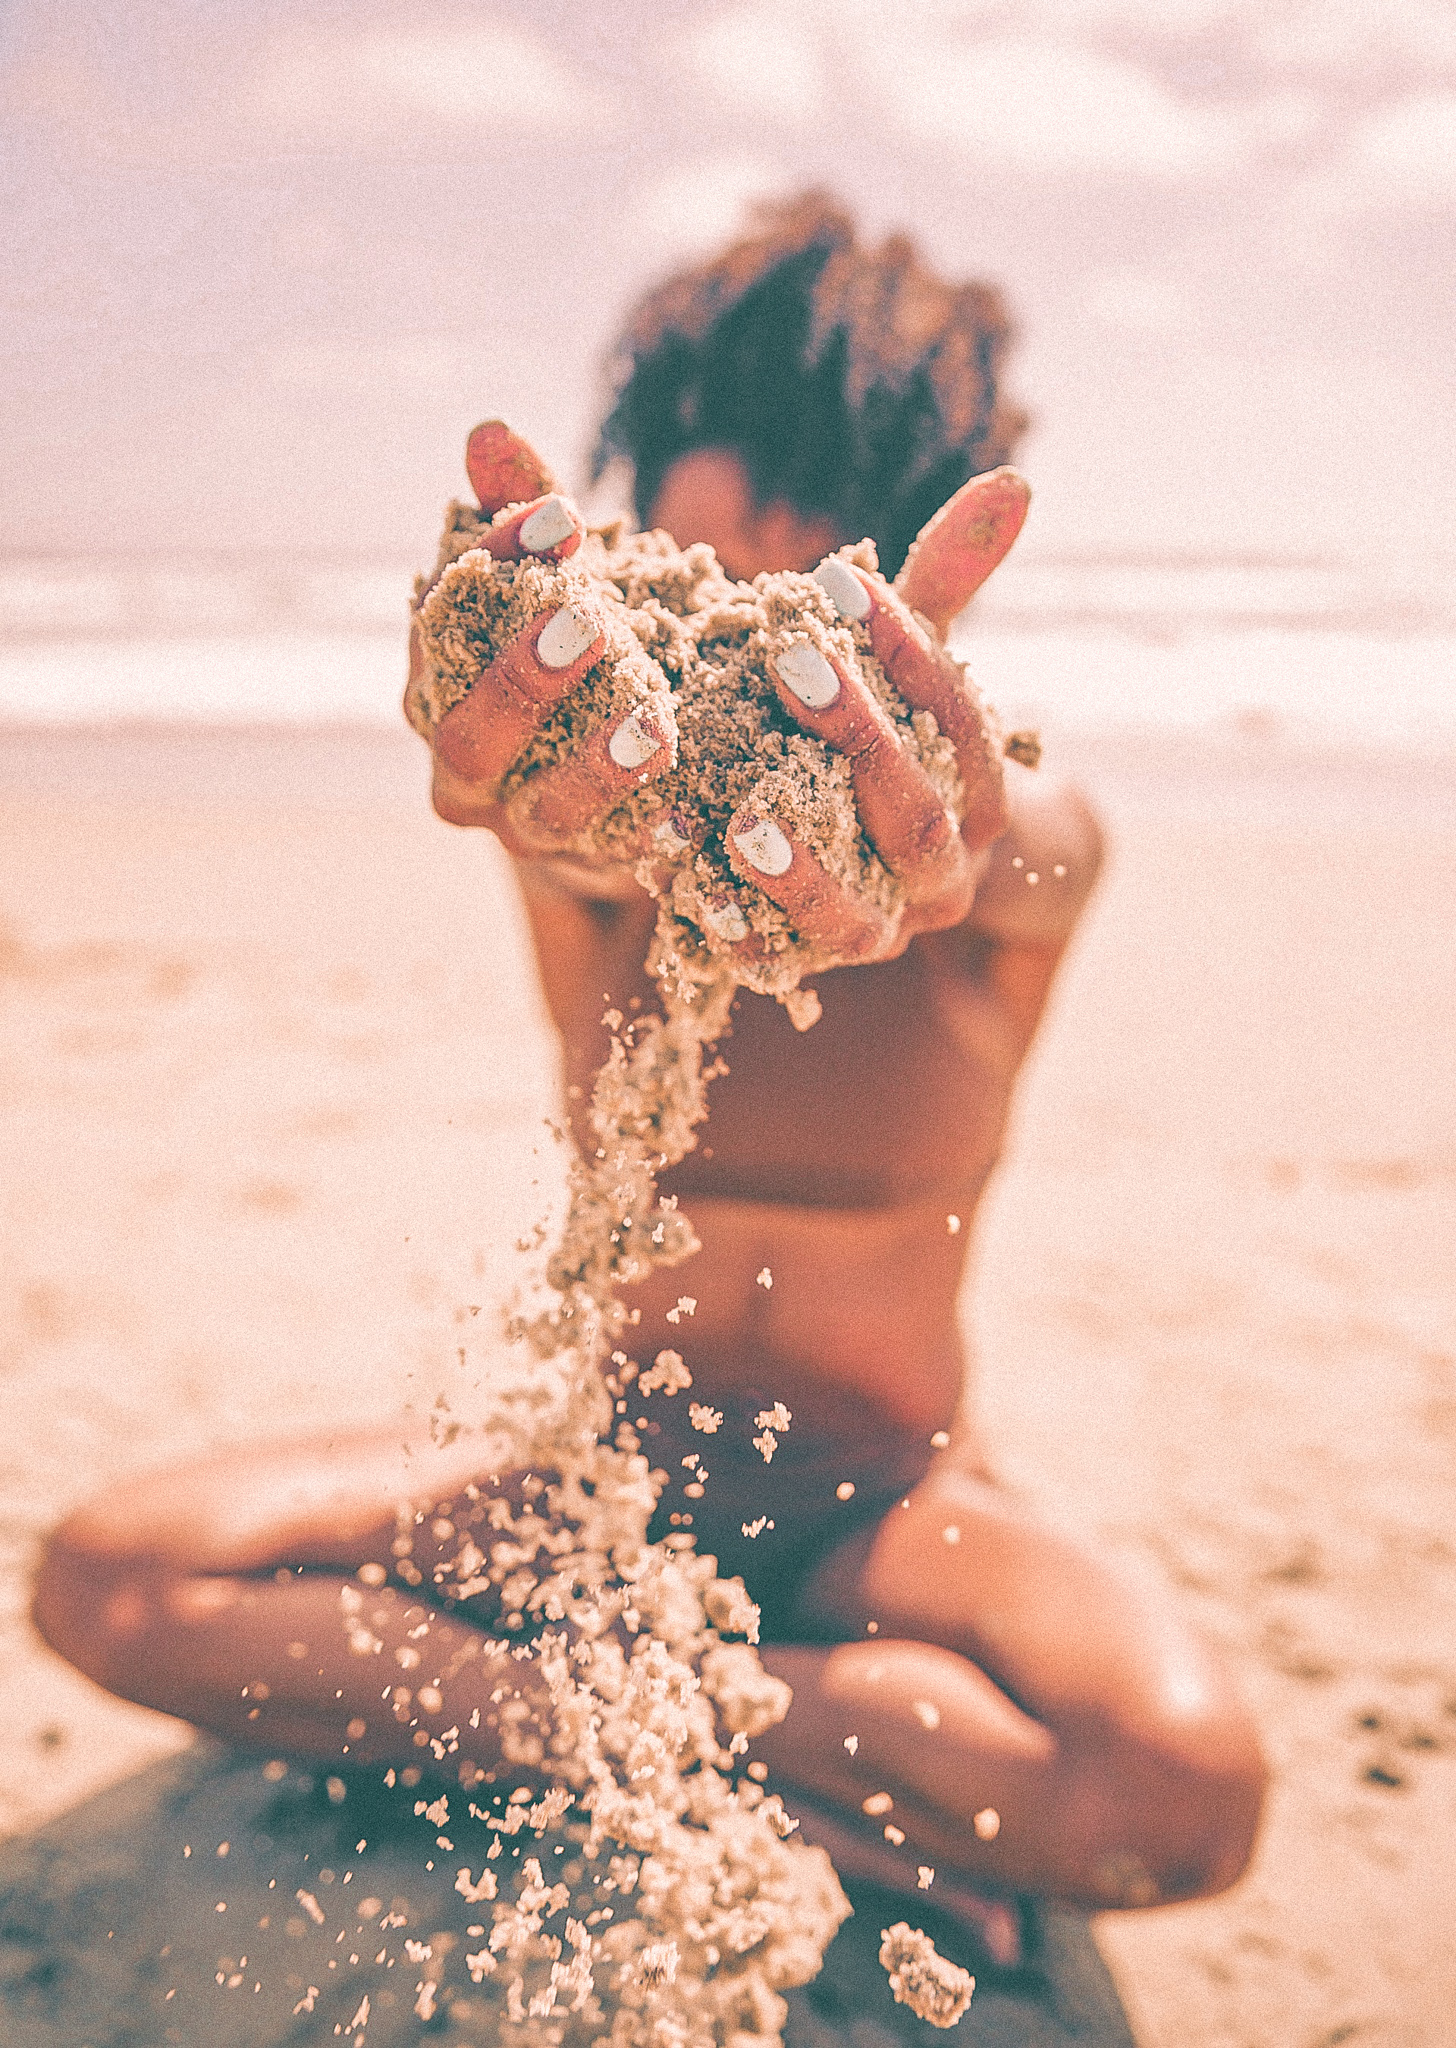 Sand in Hands